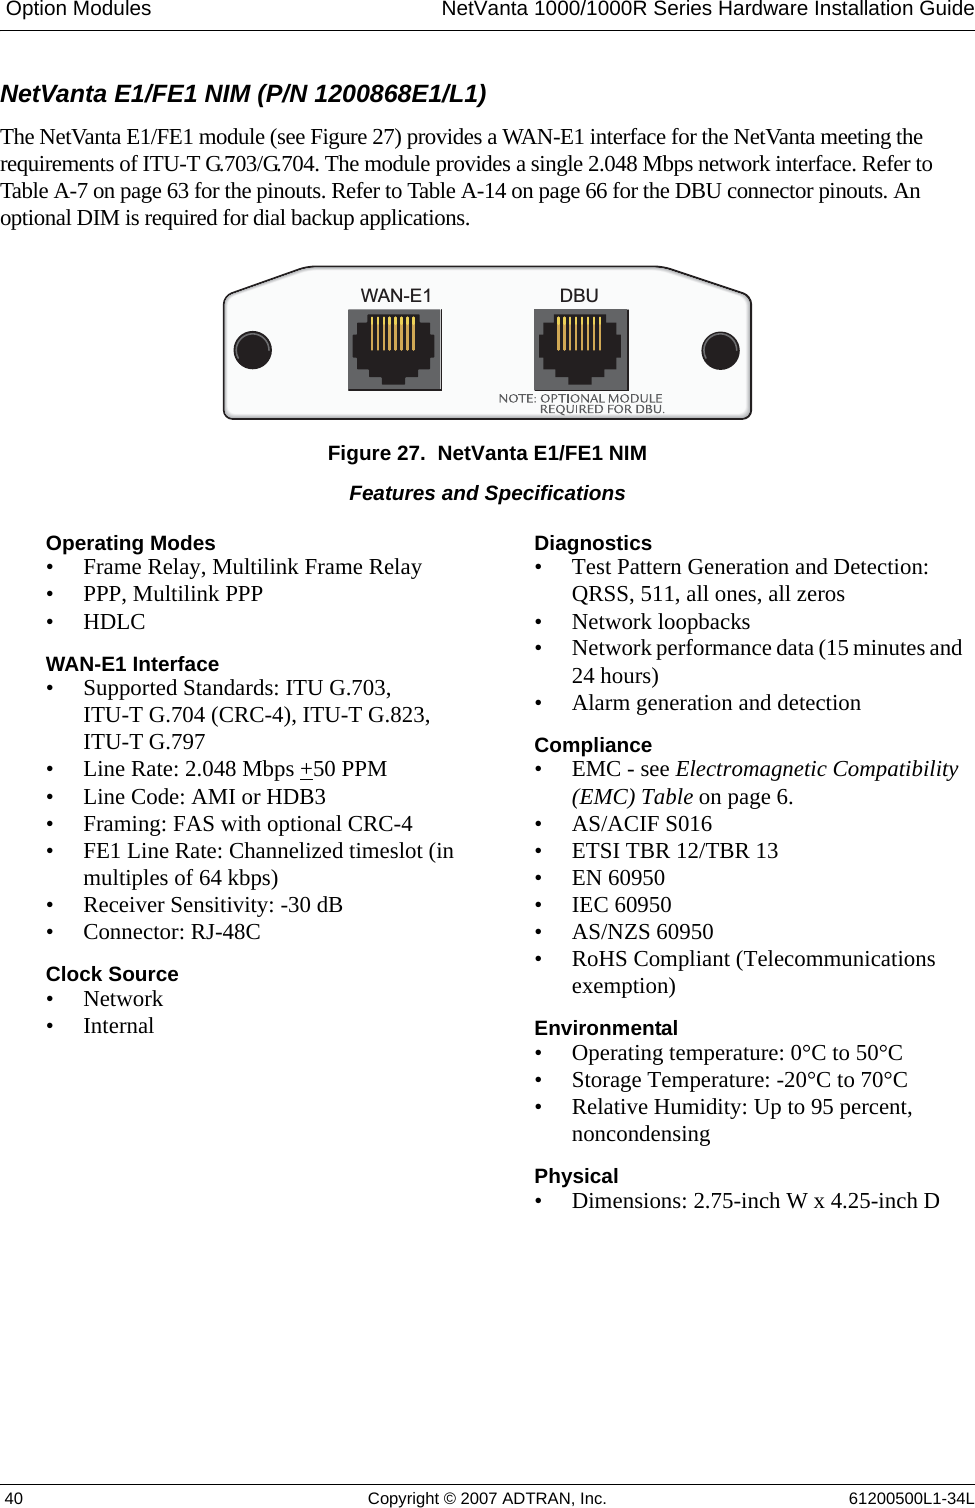  Option Modules NetVanta 1000/1000R Series Hardware Installation Guide 40 Copyright © 2007 ADTRAN, Inc. 61200500L1-34LNetVanta E1/FE1 NIM (P/N 1200868E1/L1)The NetVanta E1/FE1 module (see Figure 27) provides a WAN-E1 interface for the NetVanta meeting the requirements of ITU-T G.703/G.704. The module provides a single 2.048 Mbps network interface. Refer to Table A-7 on page 63 for the pinouts. Refer to Table A-14 on page 66 for the DBU connector pinouts. An optional DIM is required for dial backup applications.Figure 27.  NetVanta E1/FE1 NIMWAN-E1 DBUFeatures and SpecificationsOperating Modes• Frame Relay, Multilink Frame Relay• PPP, Multilink PPP• HDLCWAN-E1 Interface• Supported Standards: ITU G.703, ITU-T G.704 (CRC-4), ITU-T G.823, ITU-T G.797• Line Rate: 2.048 Mbps +50 PPM• Line Code: AMI or HDB3• Framing: FAS with optional CRC-4• FE1 Line Rate: Channelized timeslot (in multiples of 64 kbps)• Receiver Sensitivity: -30 dB• Connector: RJ-48CClock Source•Network•InternalDiagnostics• Test Pattern Generation and Detection: QRSS, 511, all ones, all zeros• Network loopbacks• Network performance data (15 minutes and 24 hours)• Alarm generation and detectionCompliance• EMC - see Electromagnetic Compatibility (EMC) Table on page 6.•AS/ACIF S016• ETSI TBR 12/TBR 13• EN 60950• IEC 60950• AS/NZS 60950• RoHS Compliant (Telecommunications exemption)Environmental • Operating temperature: 0°C to 50°C• Storage Temperature: -20°C to 70°C• Relative Humidity: Up to 95 percent, noncondensingPhysical • Dimensions: 2.75-inch W x 4.25-inch D